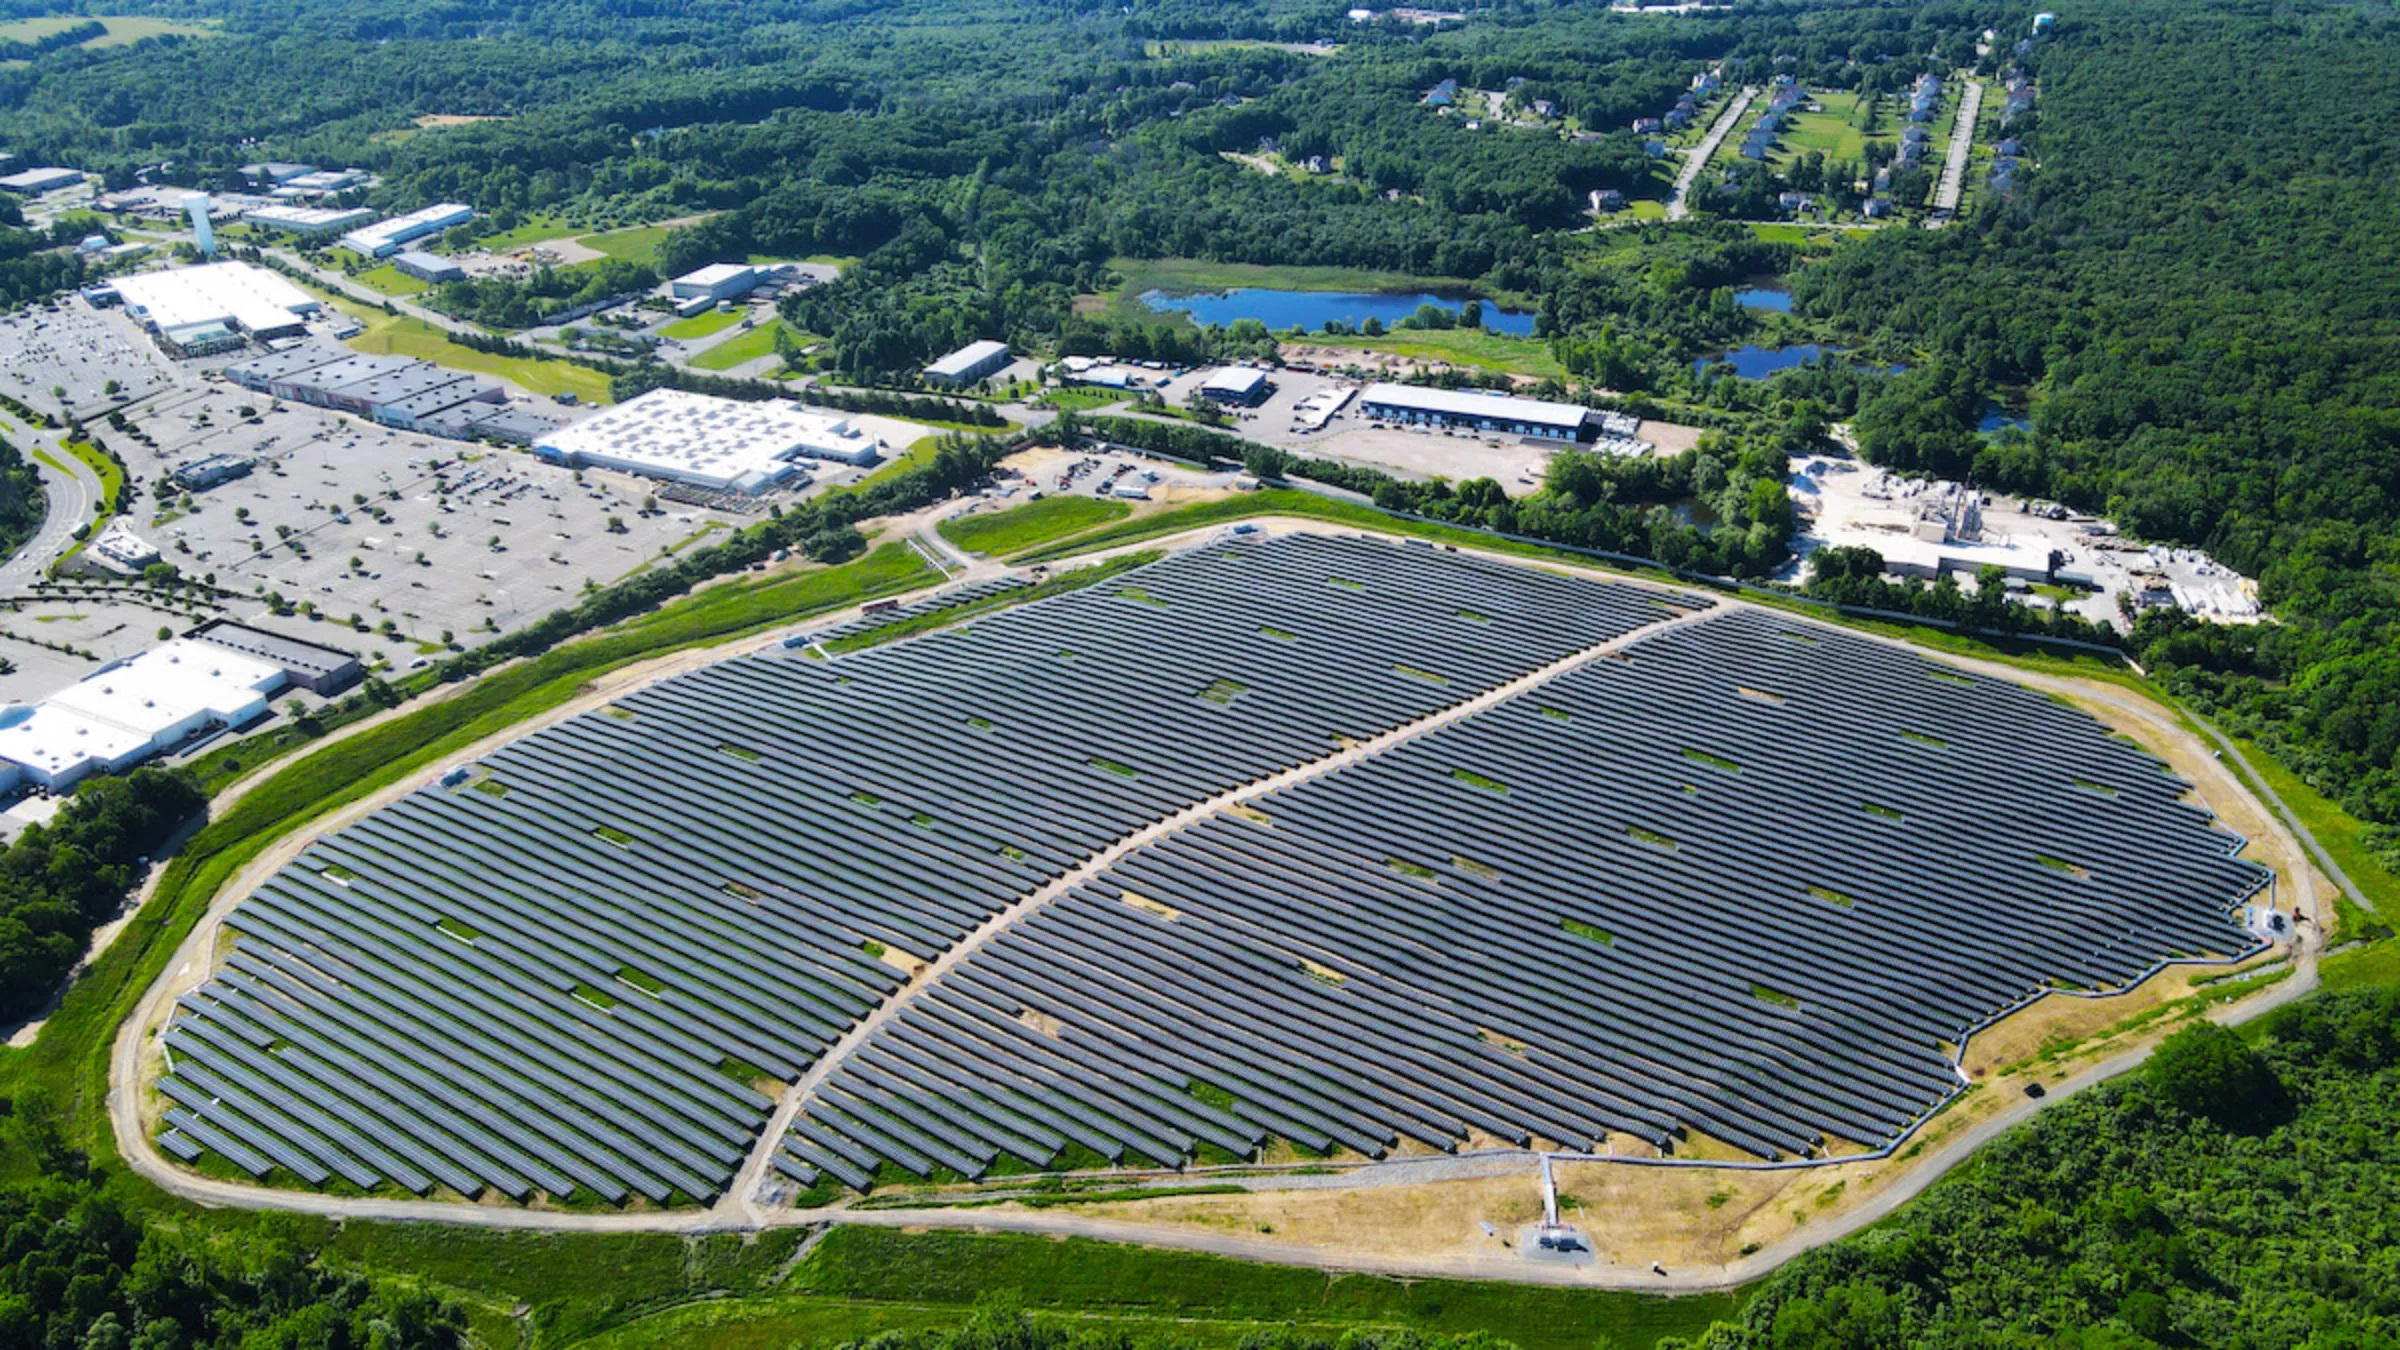 A solar park built on a closed municipal landfill and polluted “Superfund” site in Mount Olive Township, New Jersey, seen in September 2022. CS Energy/Handout via Thomson Reuters Foundation